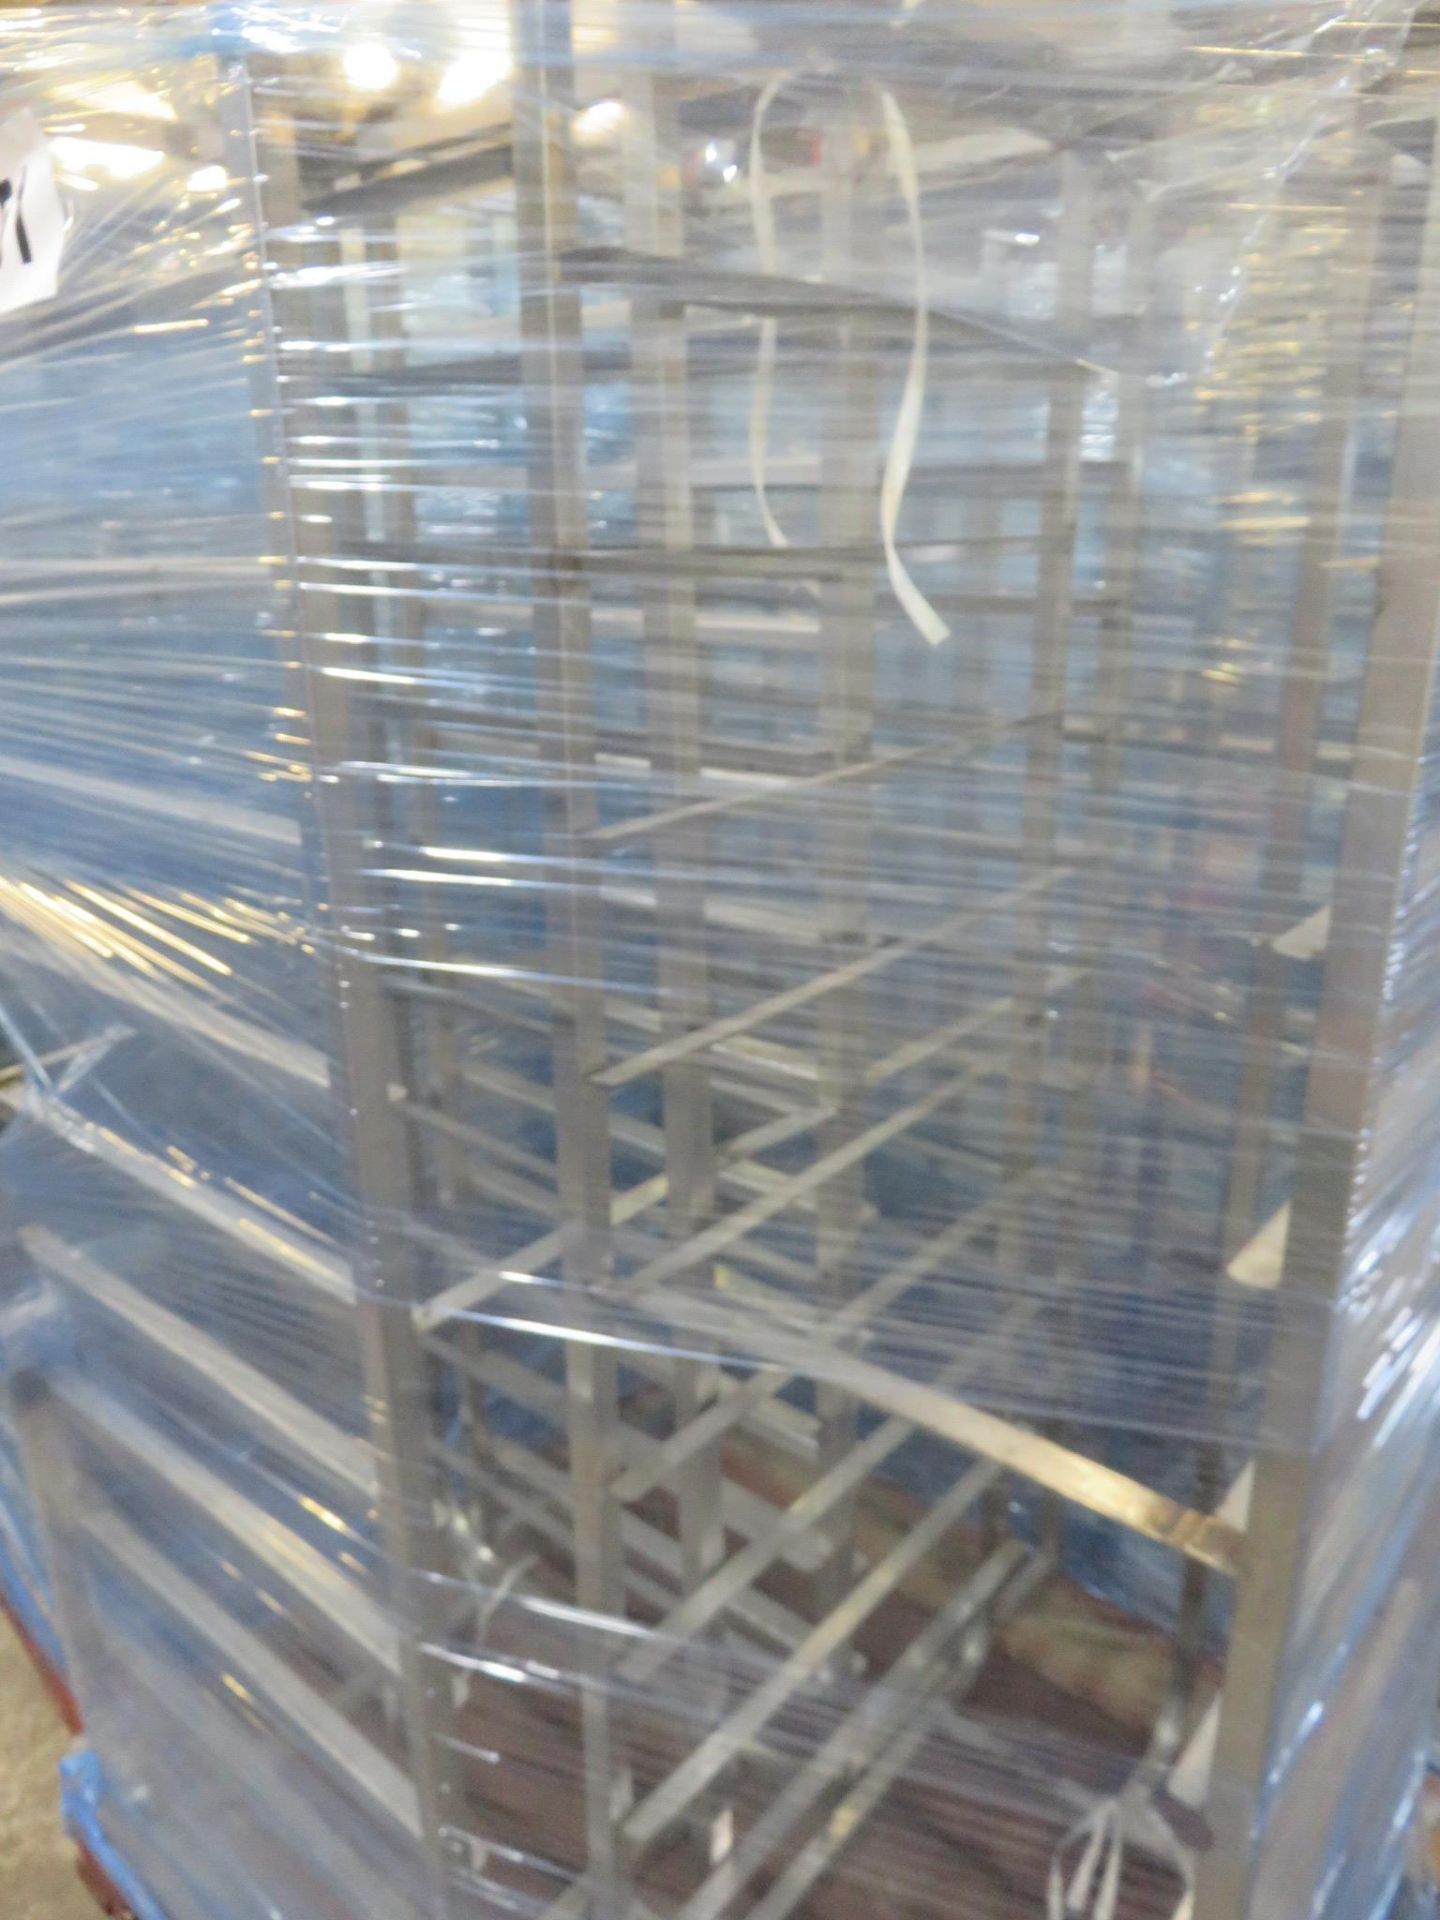 3 x S/s Racks:- 2x S/s Racks capable of taking 10 trays.Approx. 430 x 650 x 1800mm high.LO£20 - Image 2 of 2